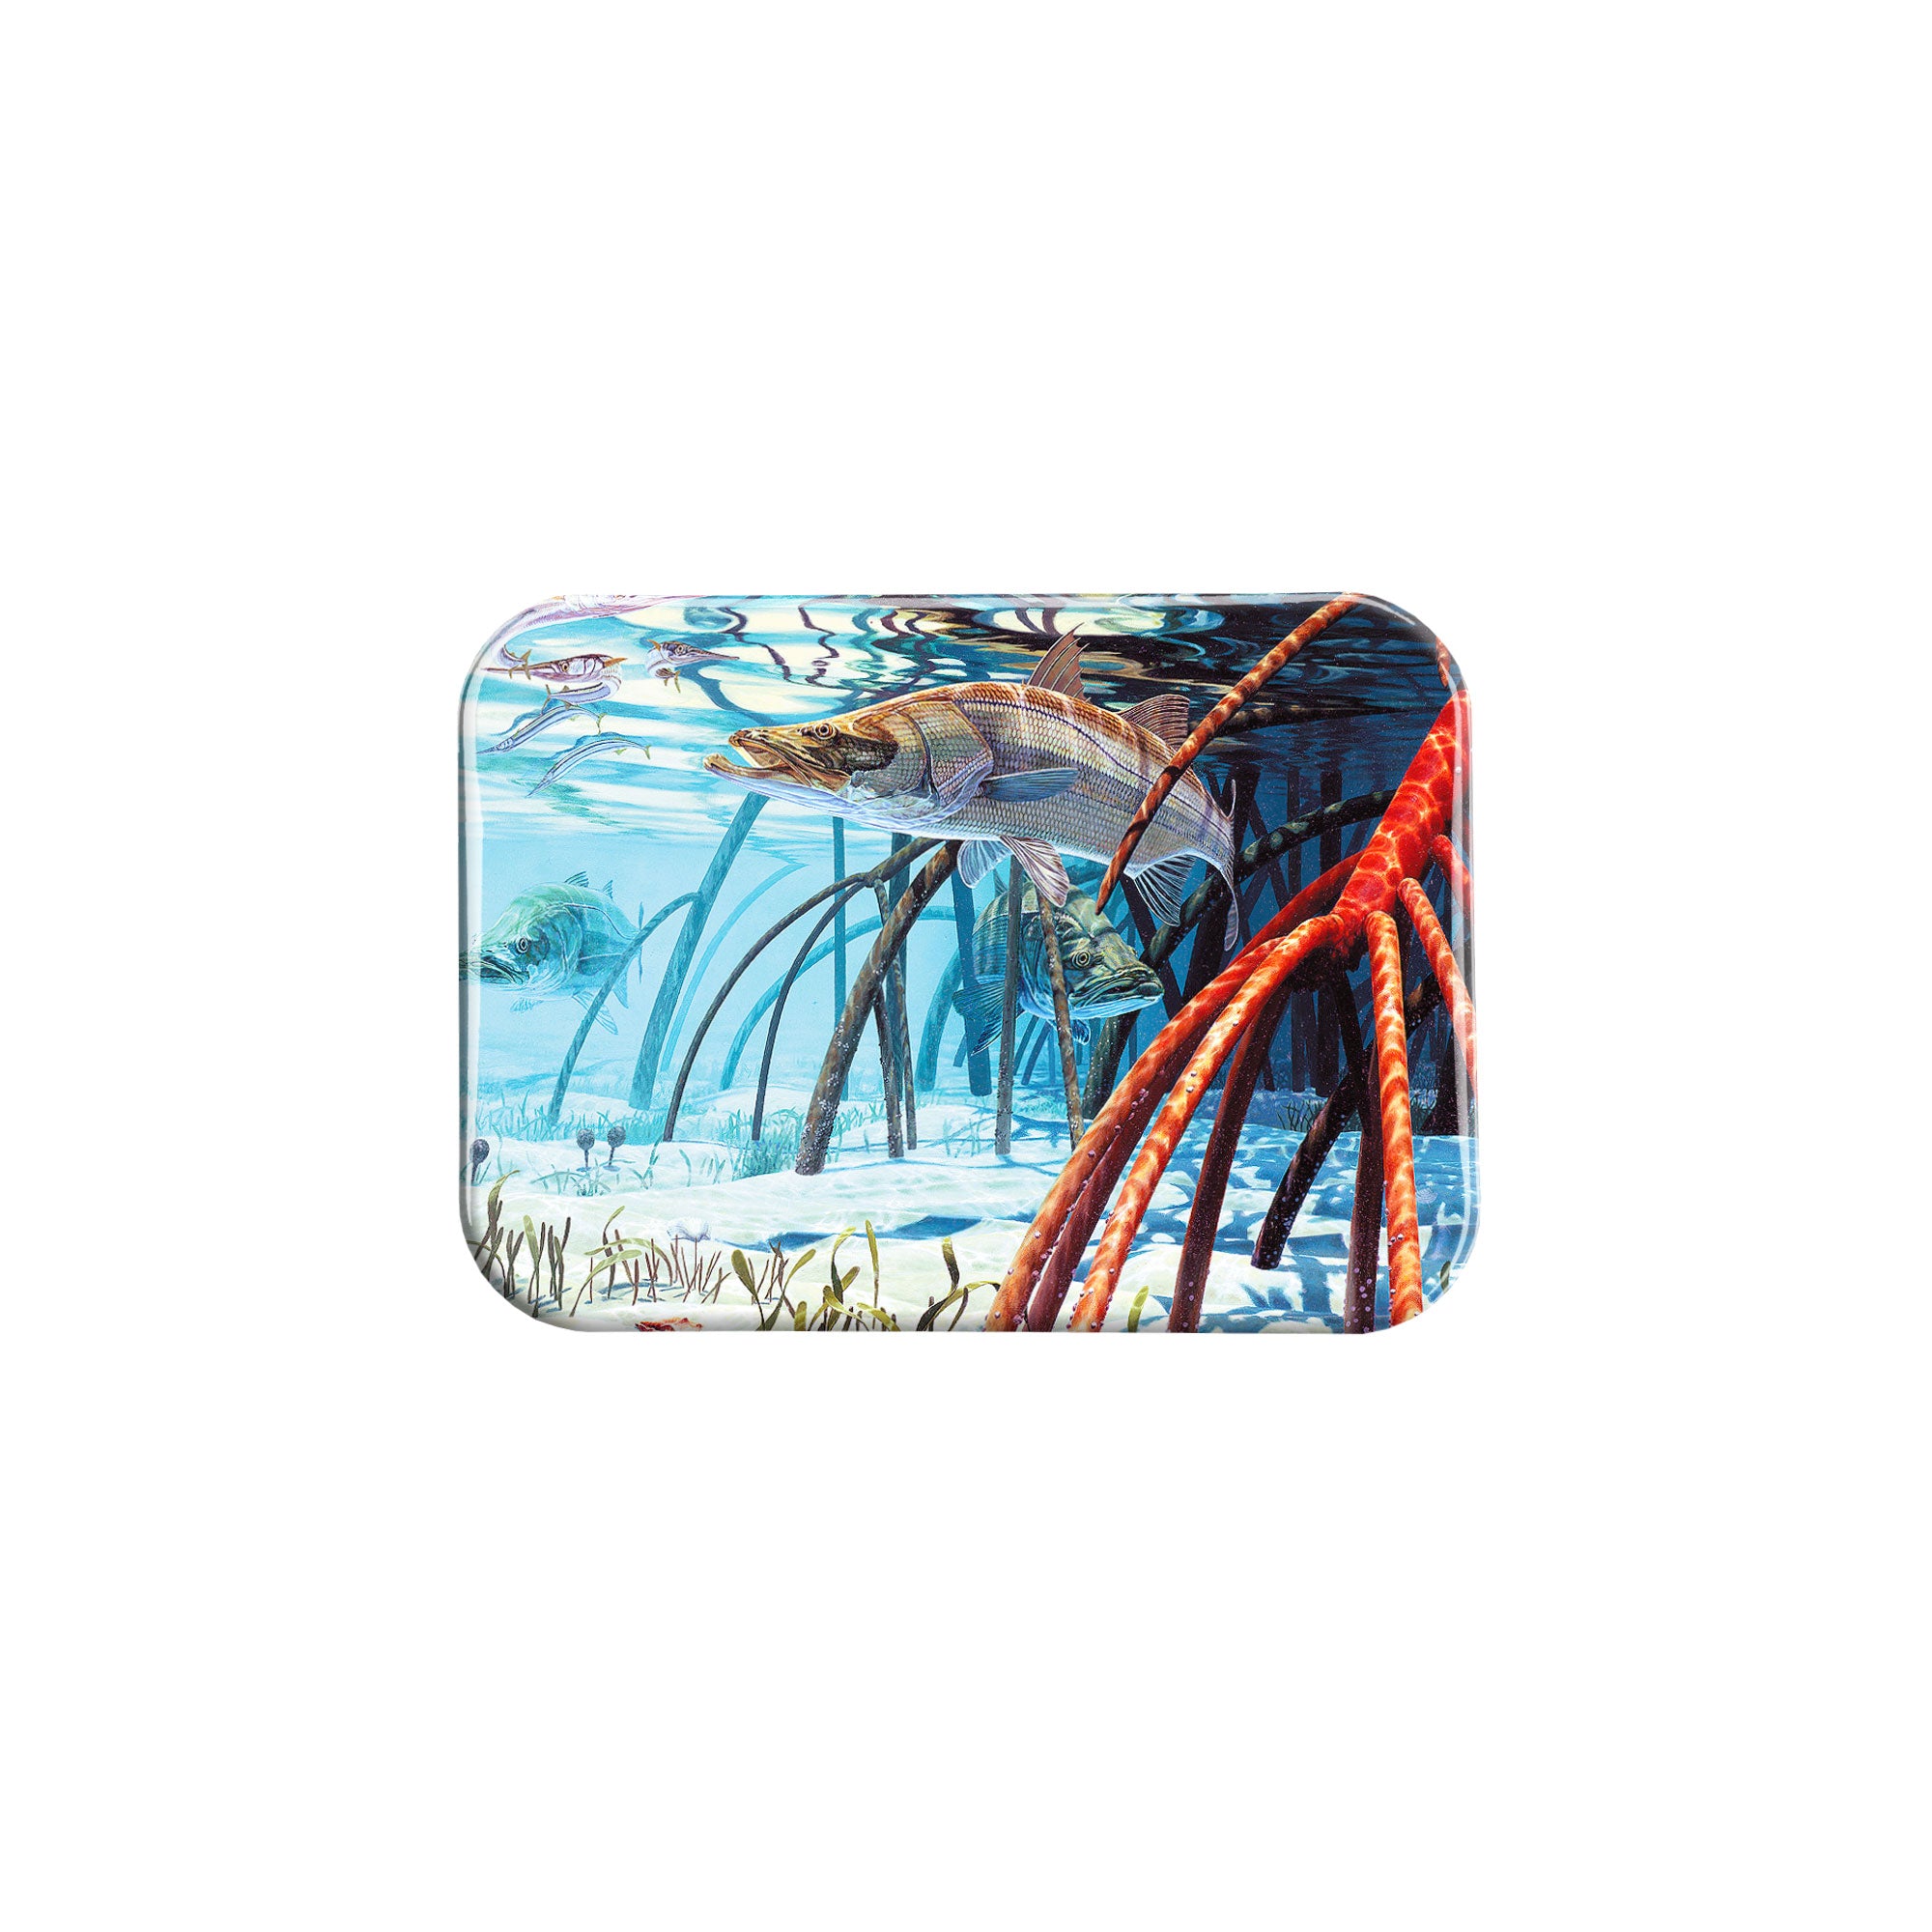 "Snook In The Mangroves" - 2.5" X 3.5" Rectangle Fridge Magnets